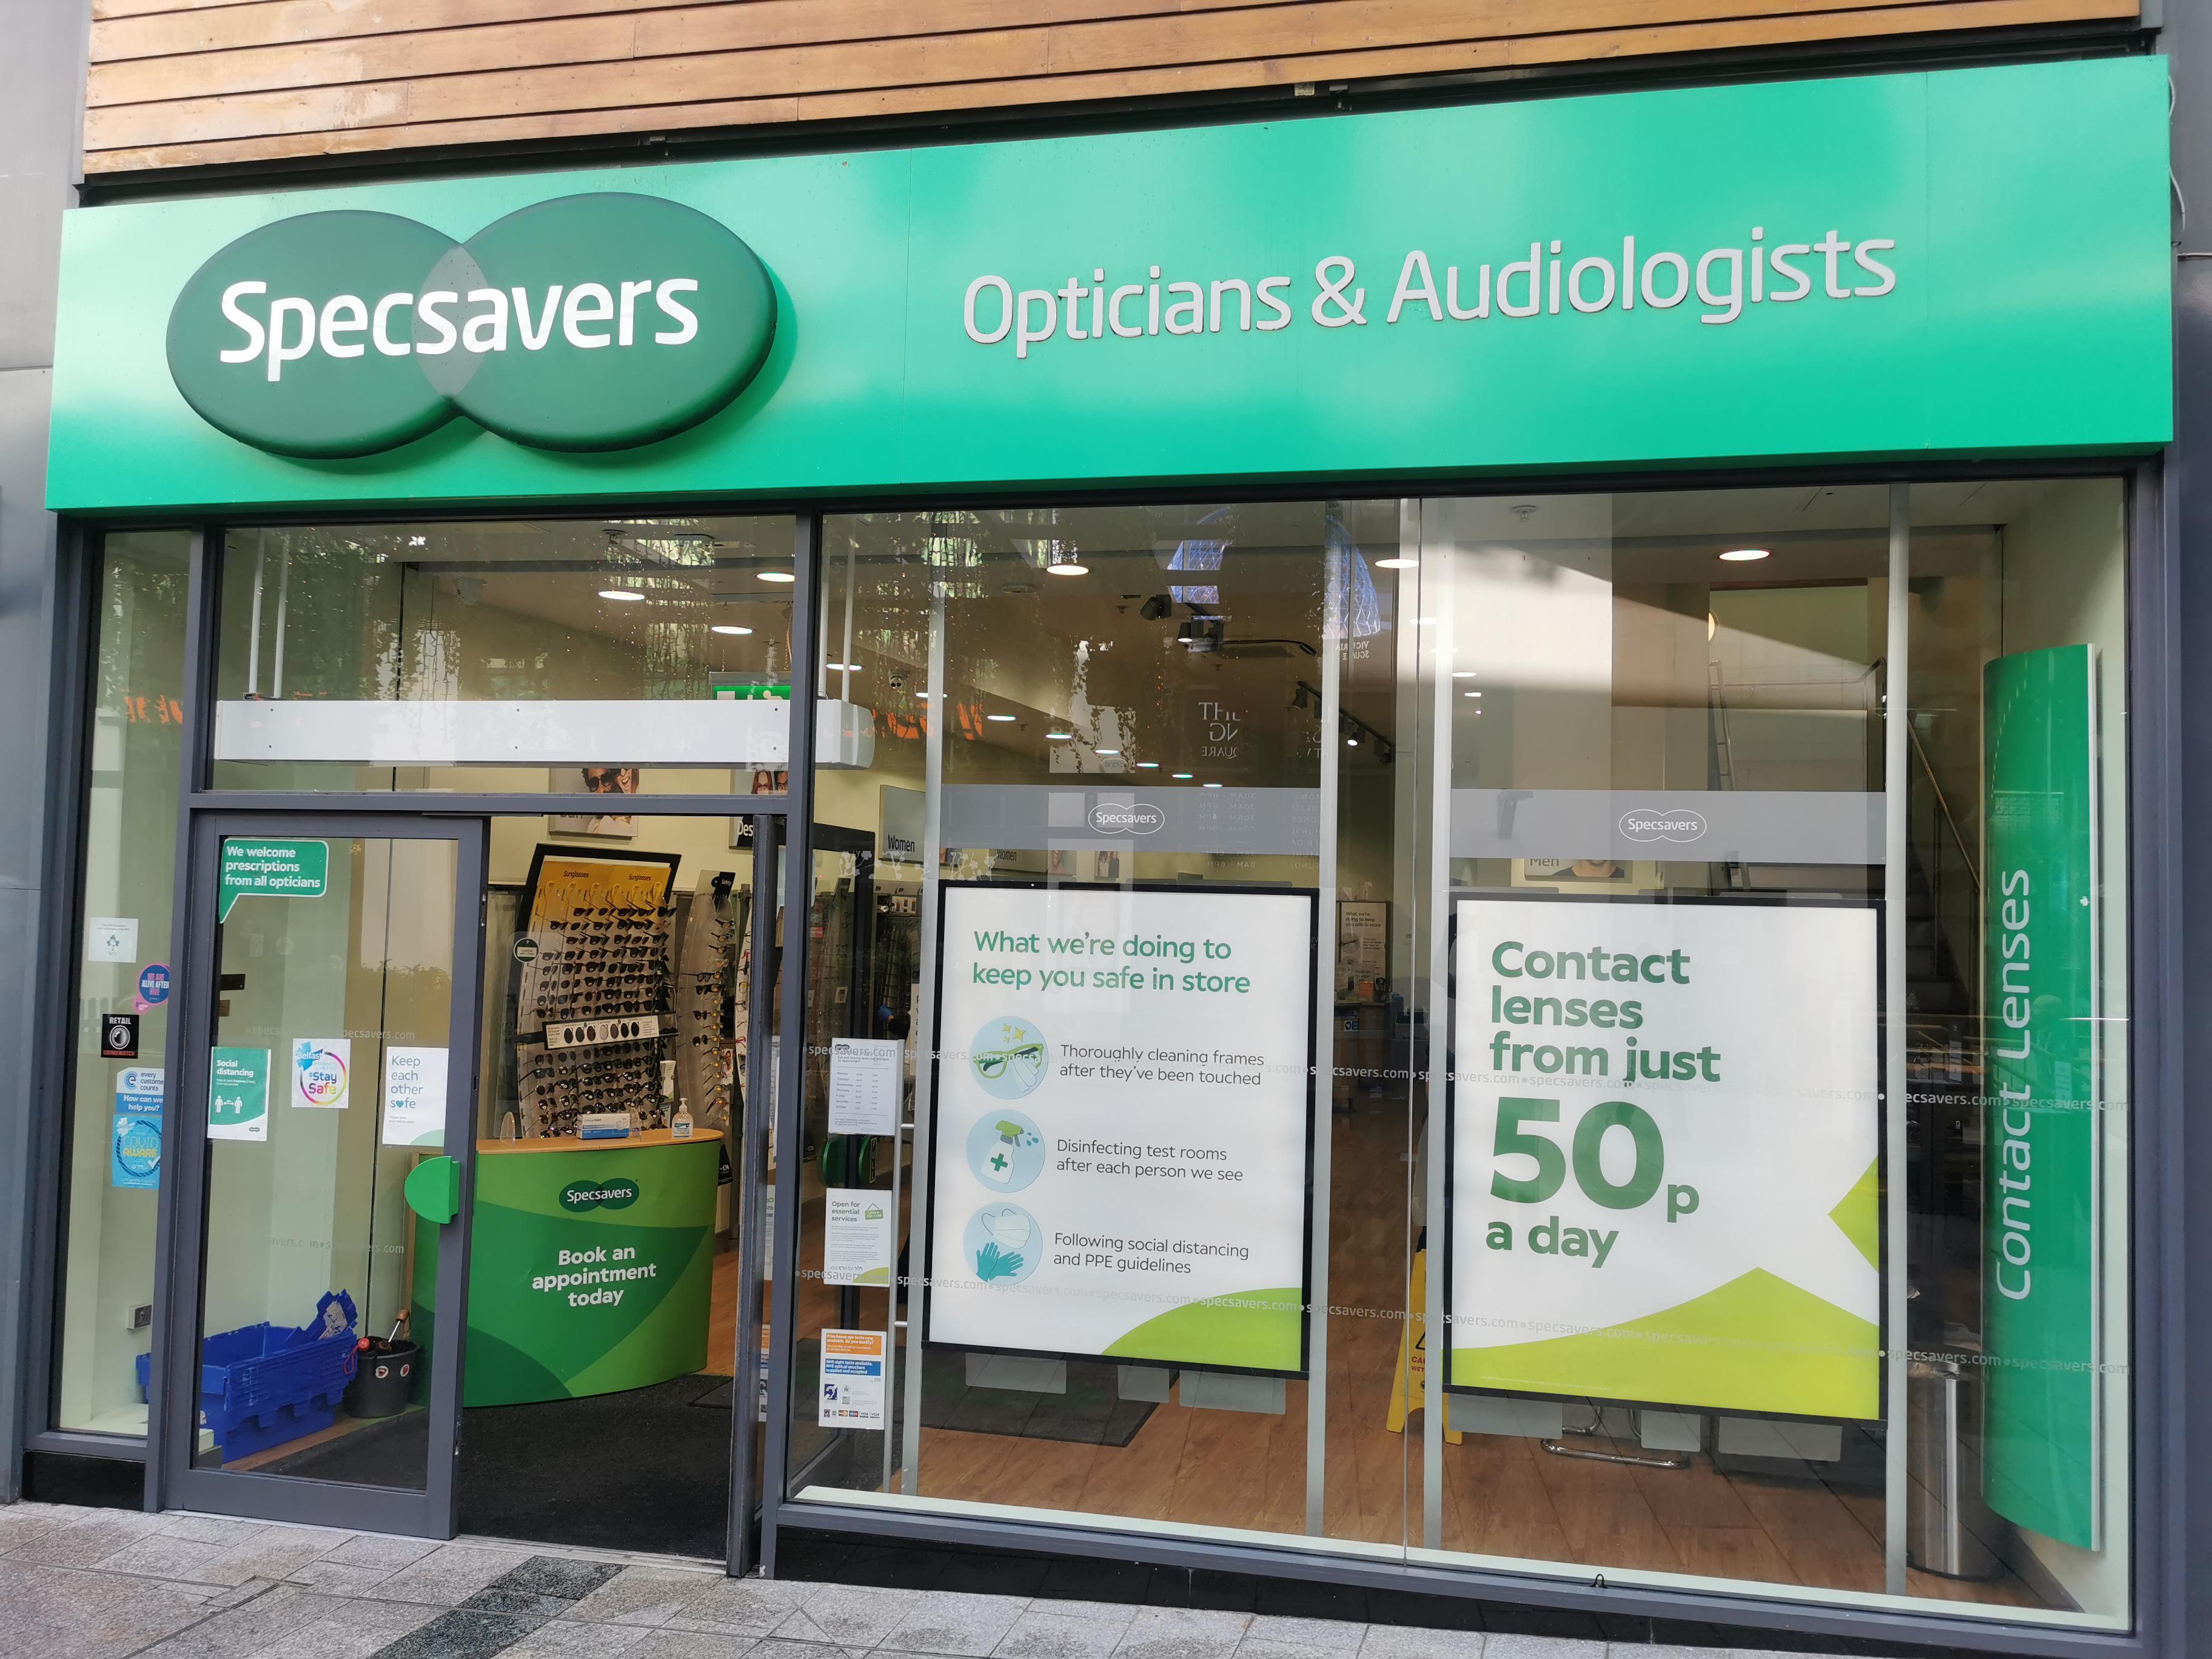 Images Specsavers Opticians and Audiologists - Belfast